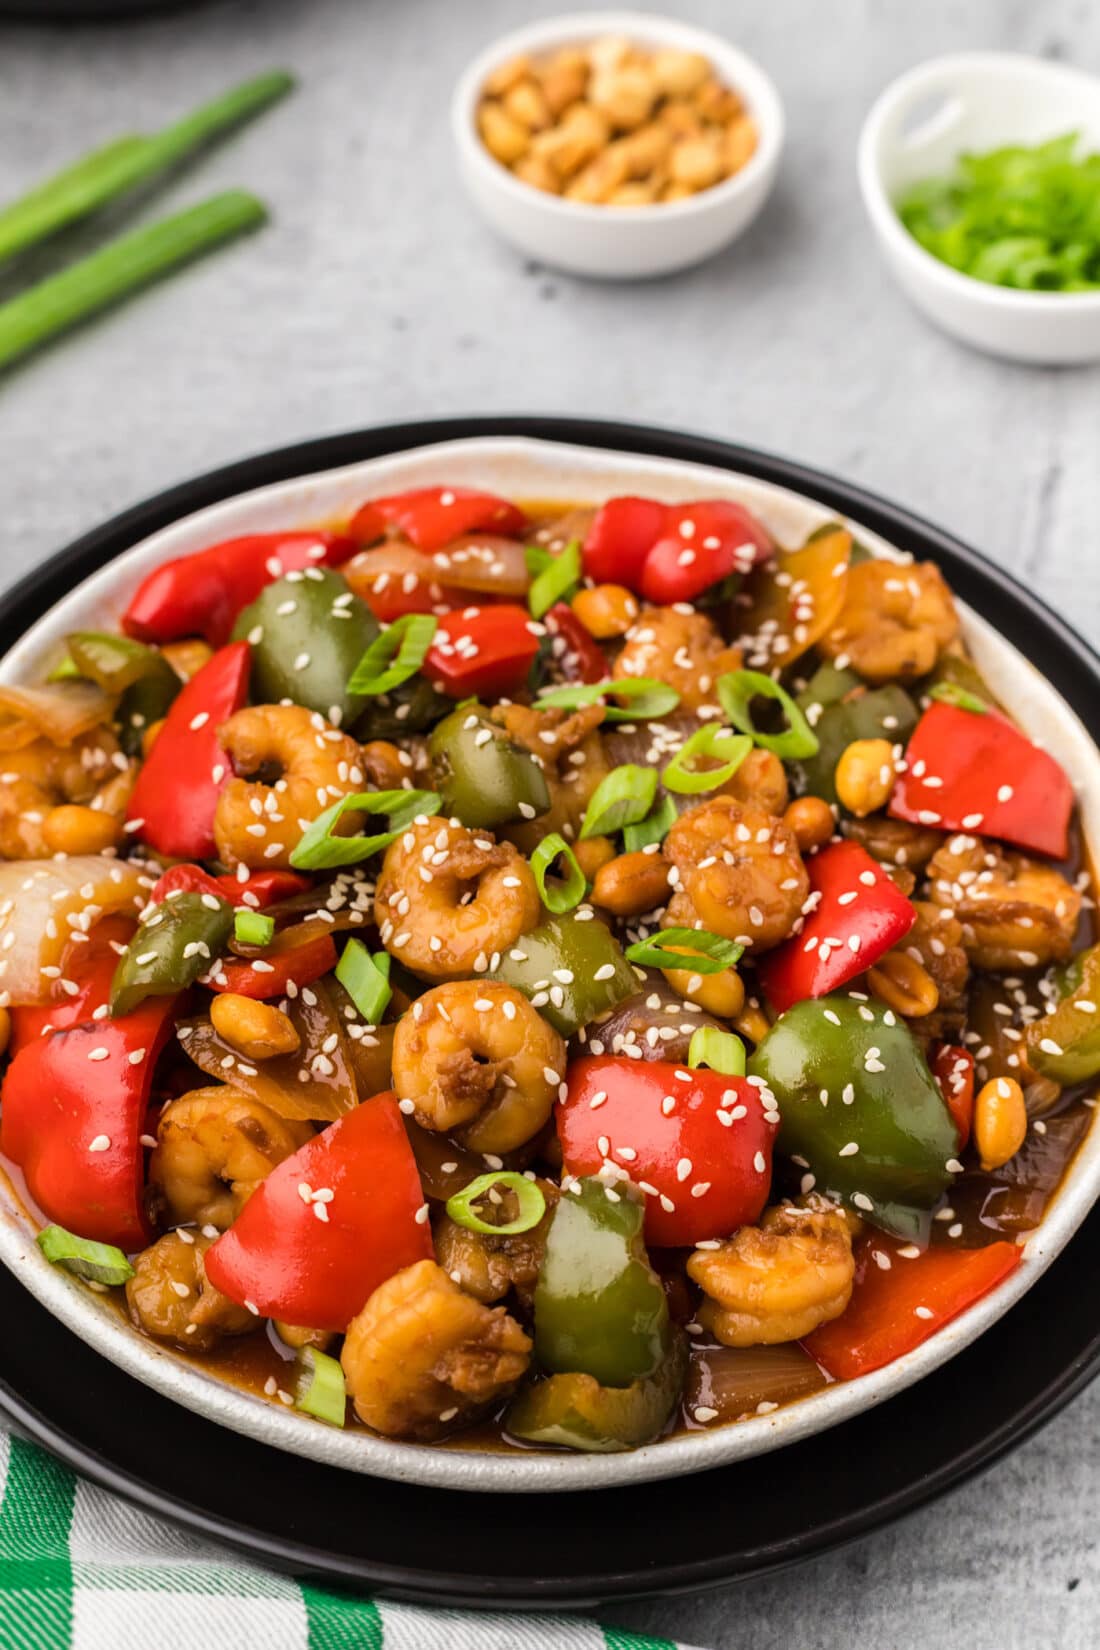 Plate of Kung Pao Shrimp